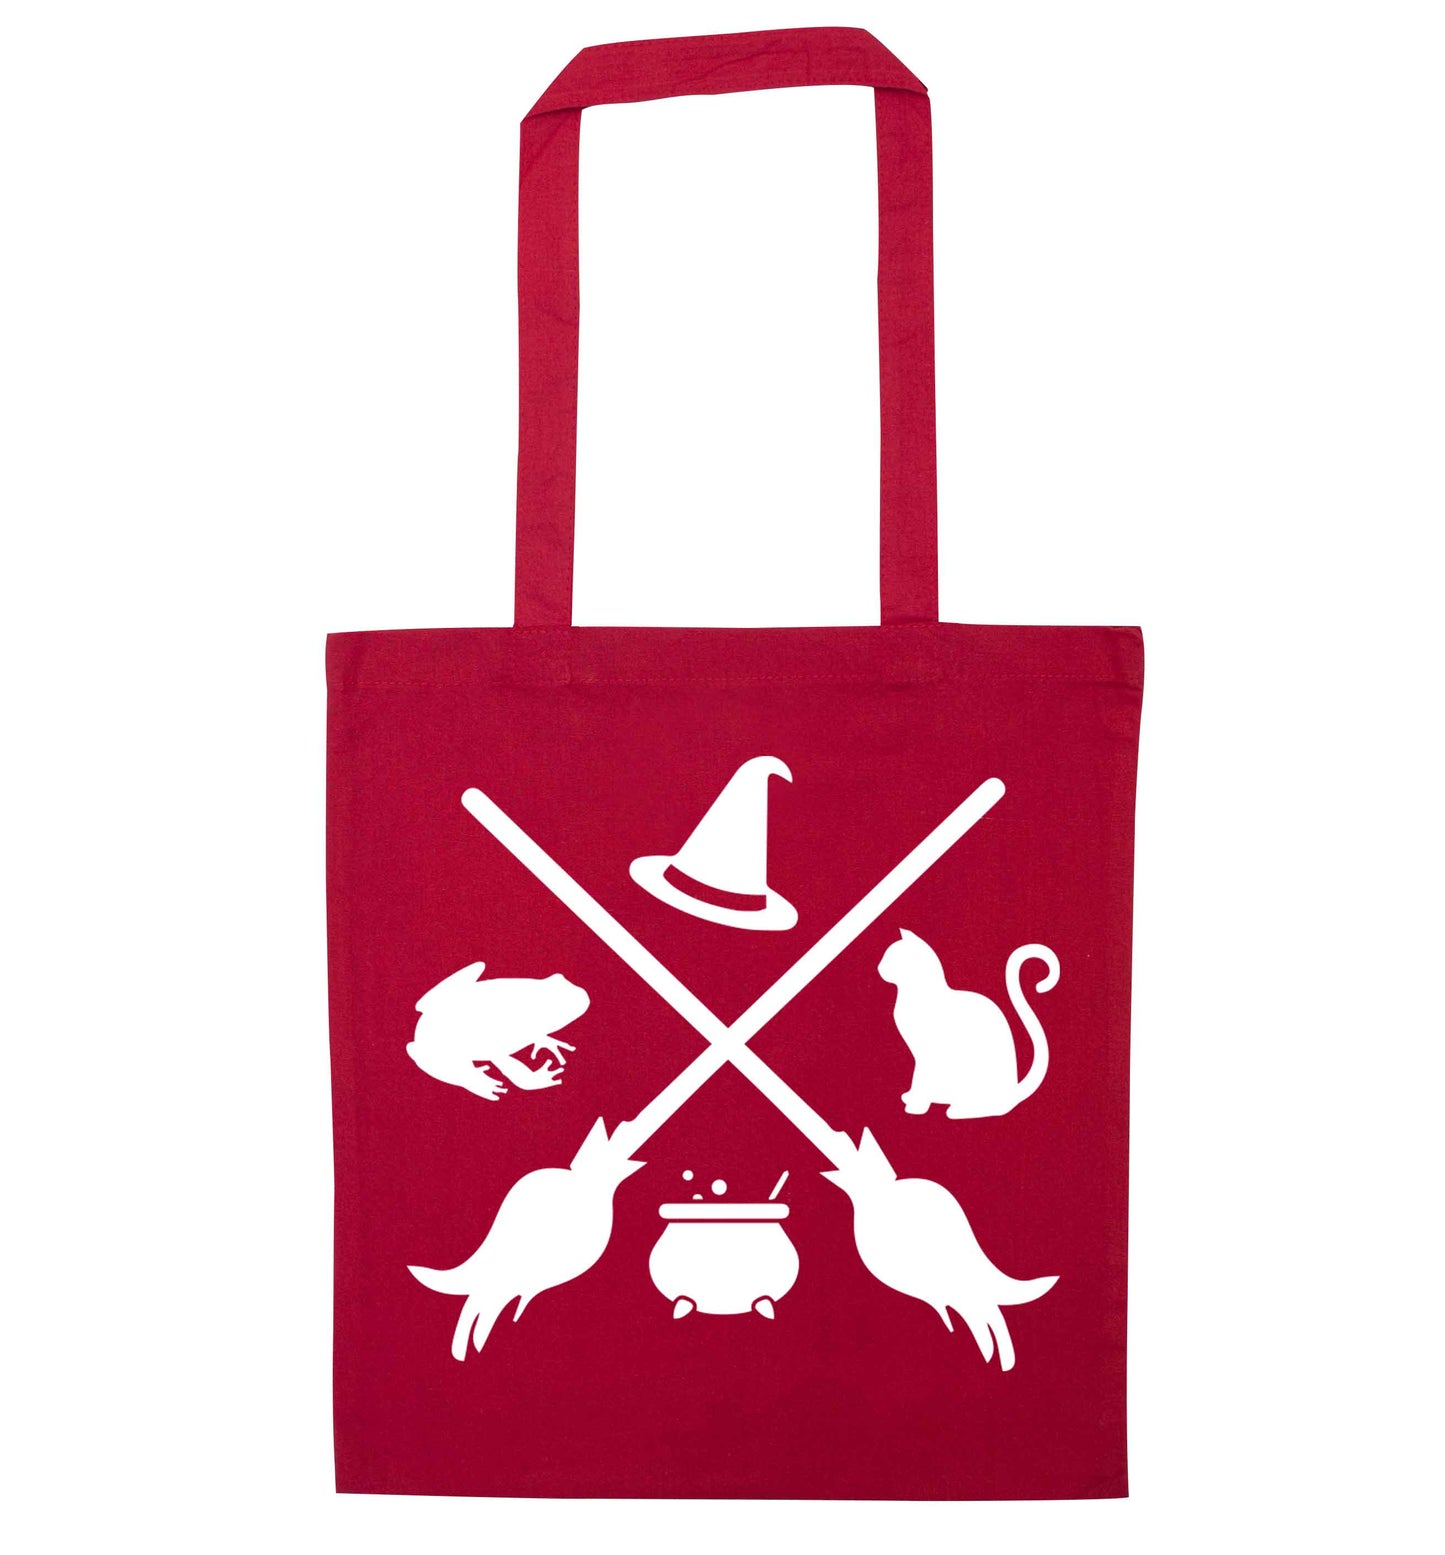 Witch symbol red tote bag